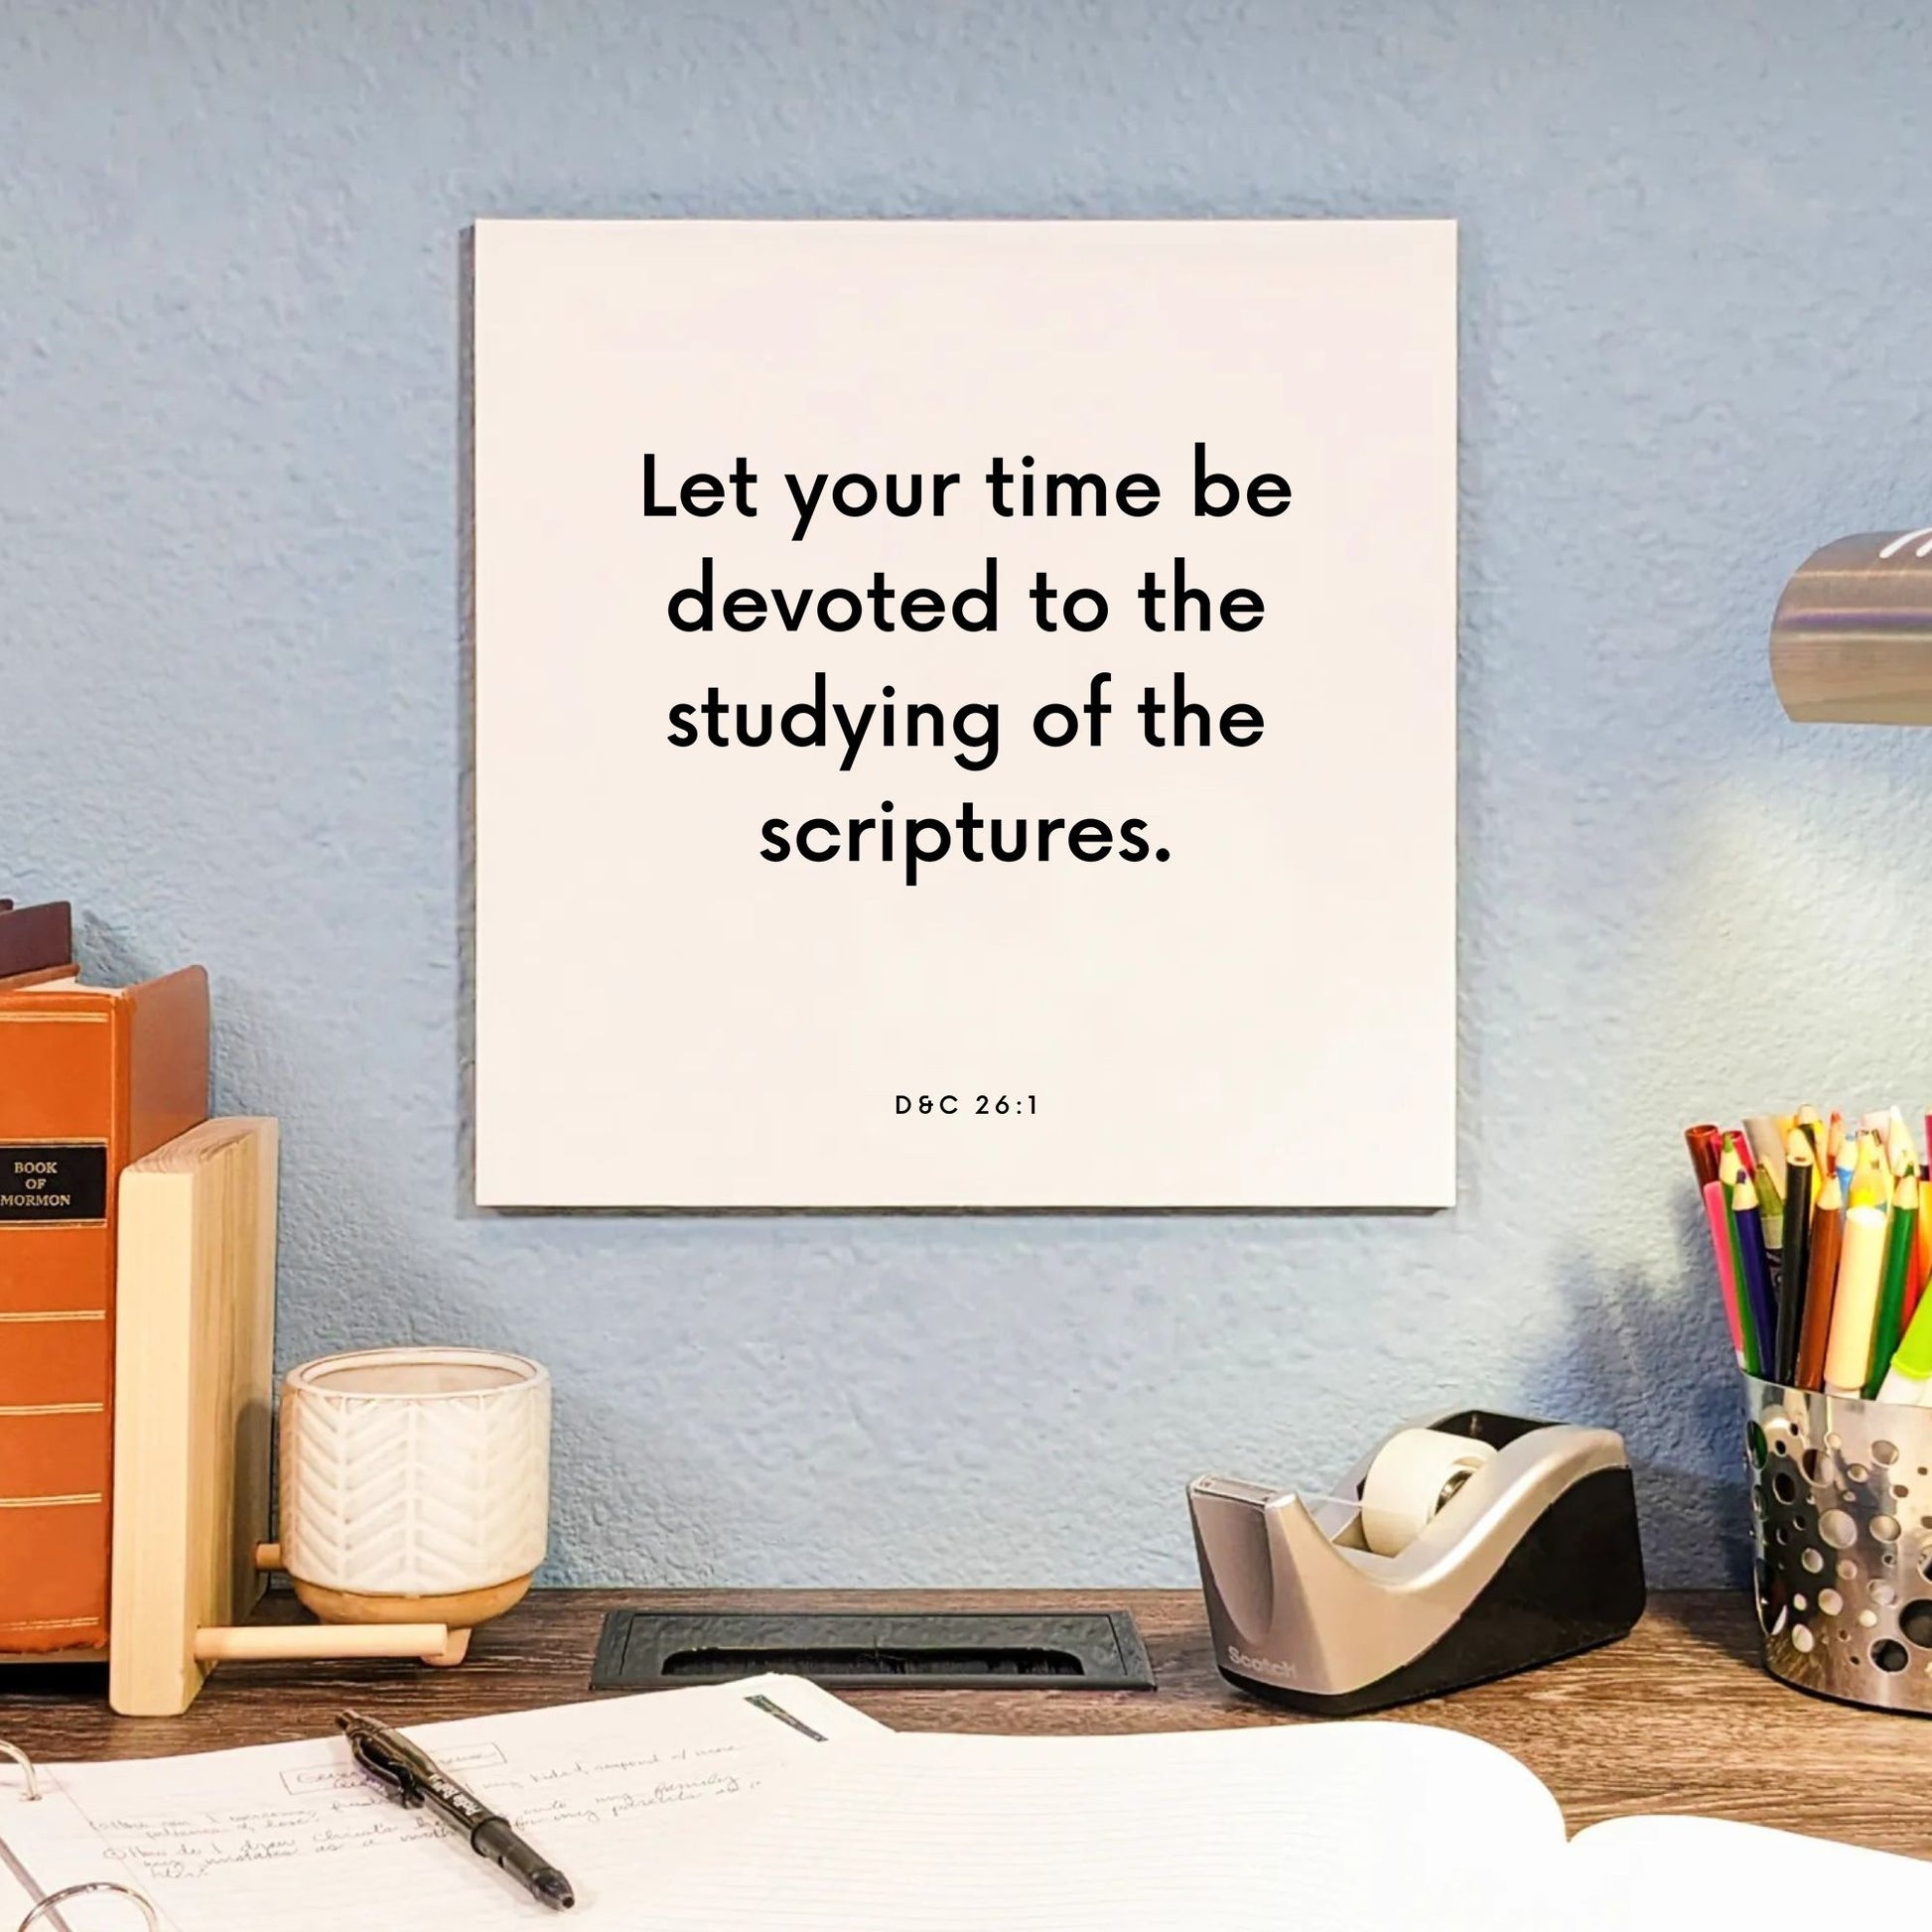 Desk mouting of the scripture tile for D&C 26:1 - "Let your time be devoted to the studying of the scriptures"